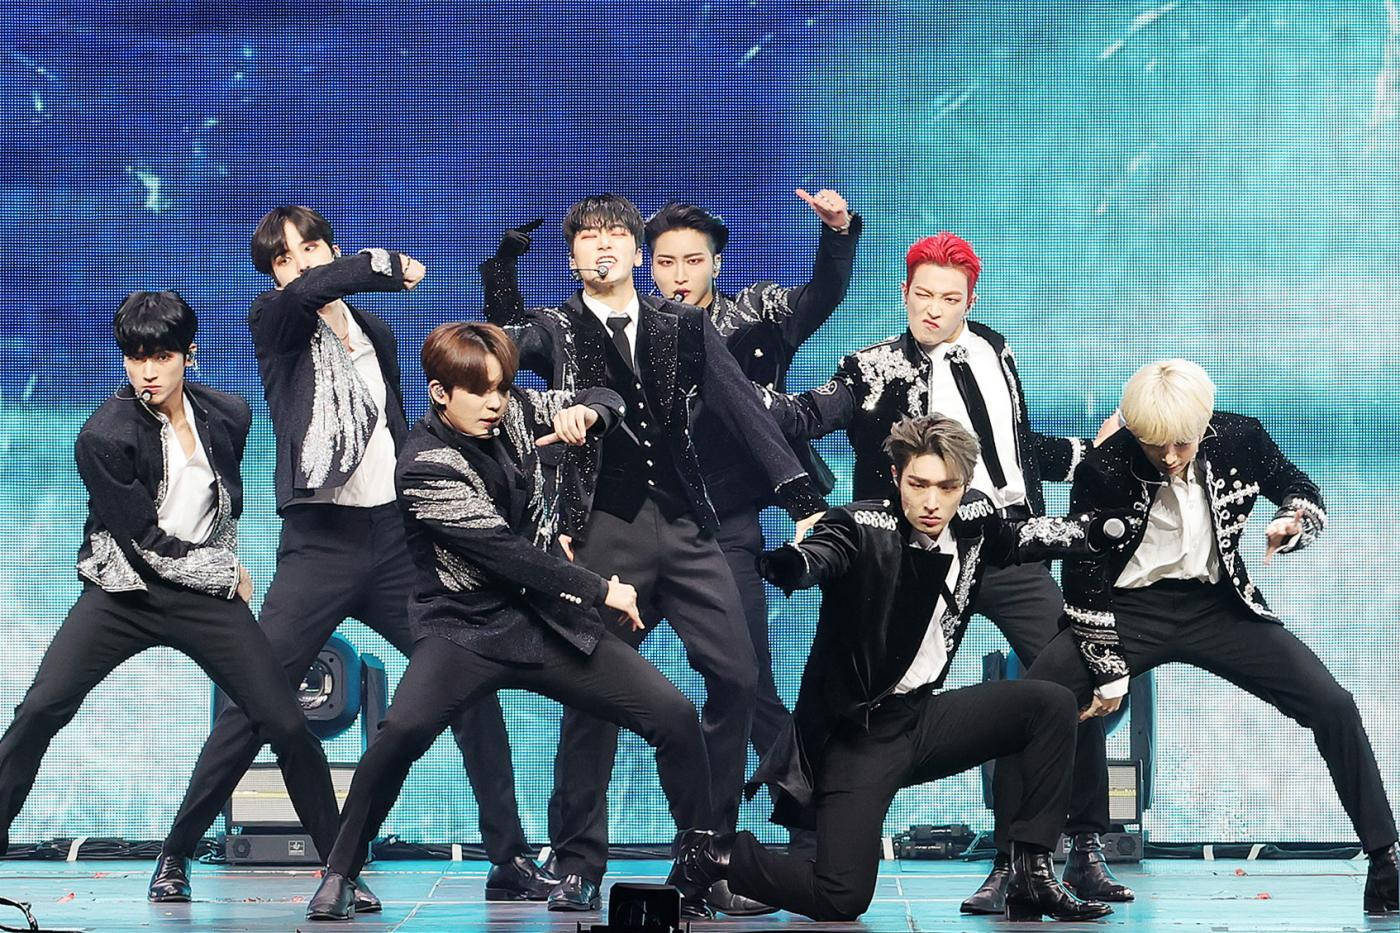 Ateez Dancing Poses Background